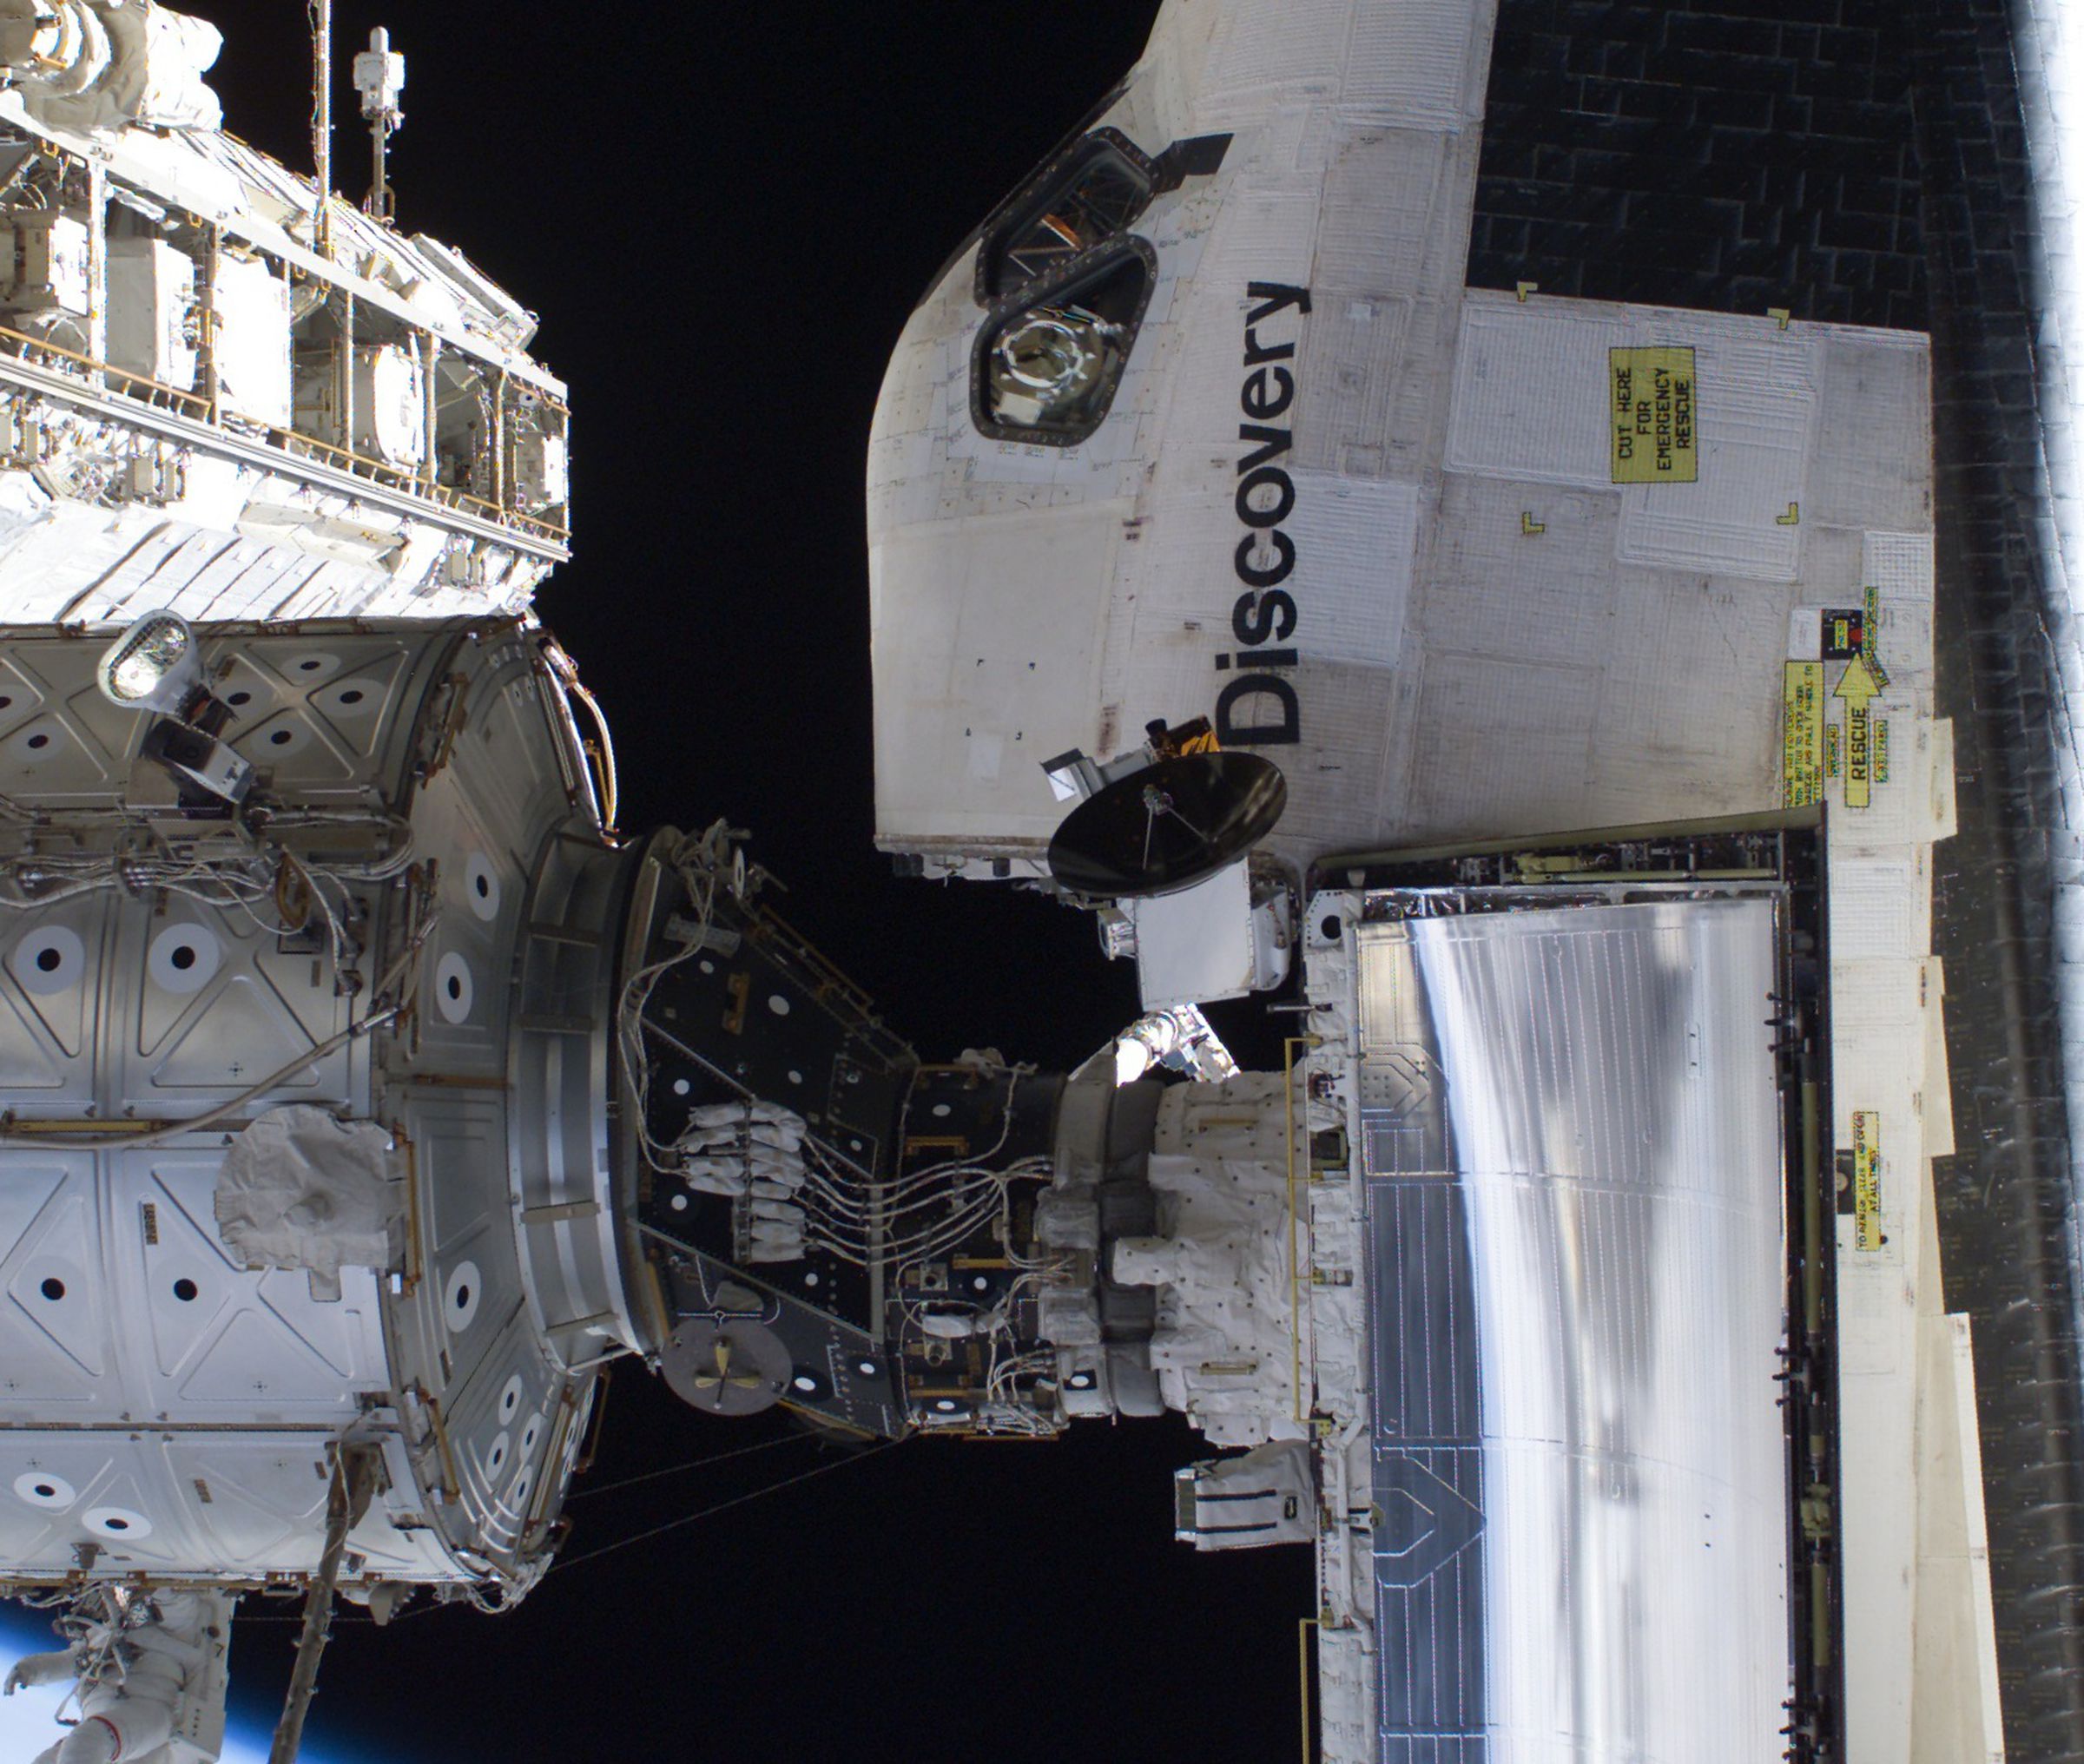 One of the station’s PMAs hooked up to Space Shuttle Discovery.